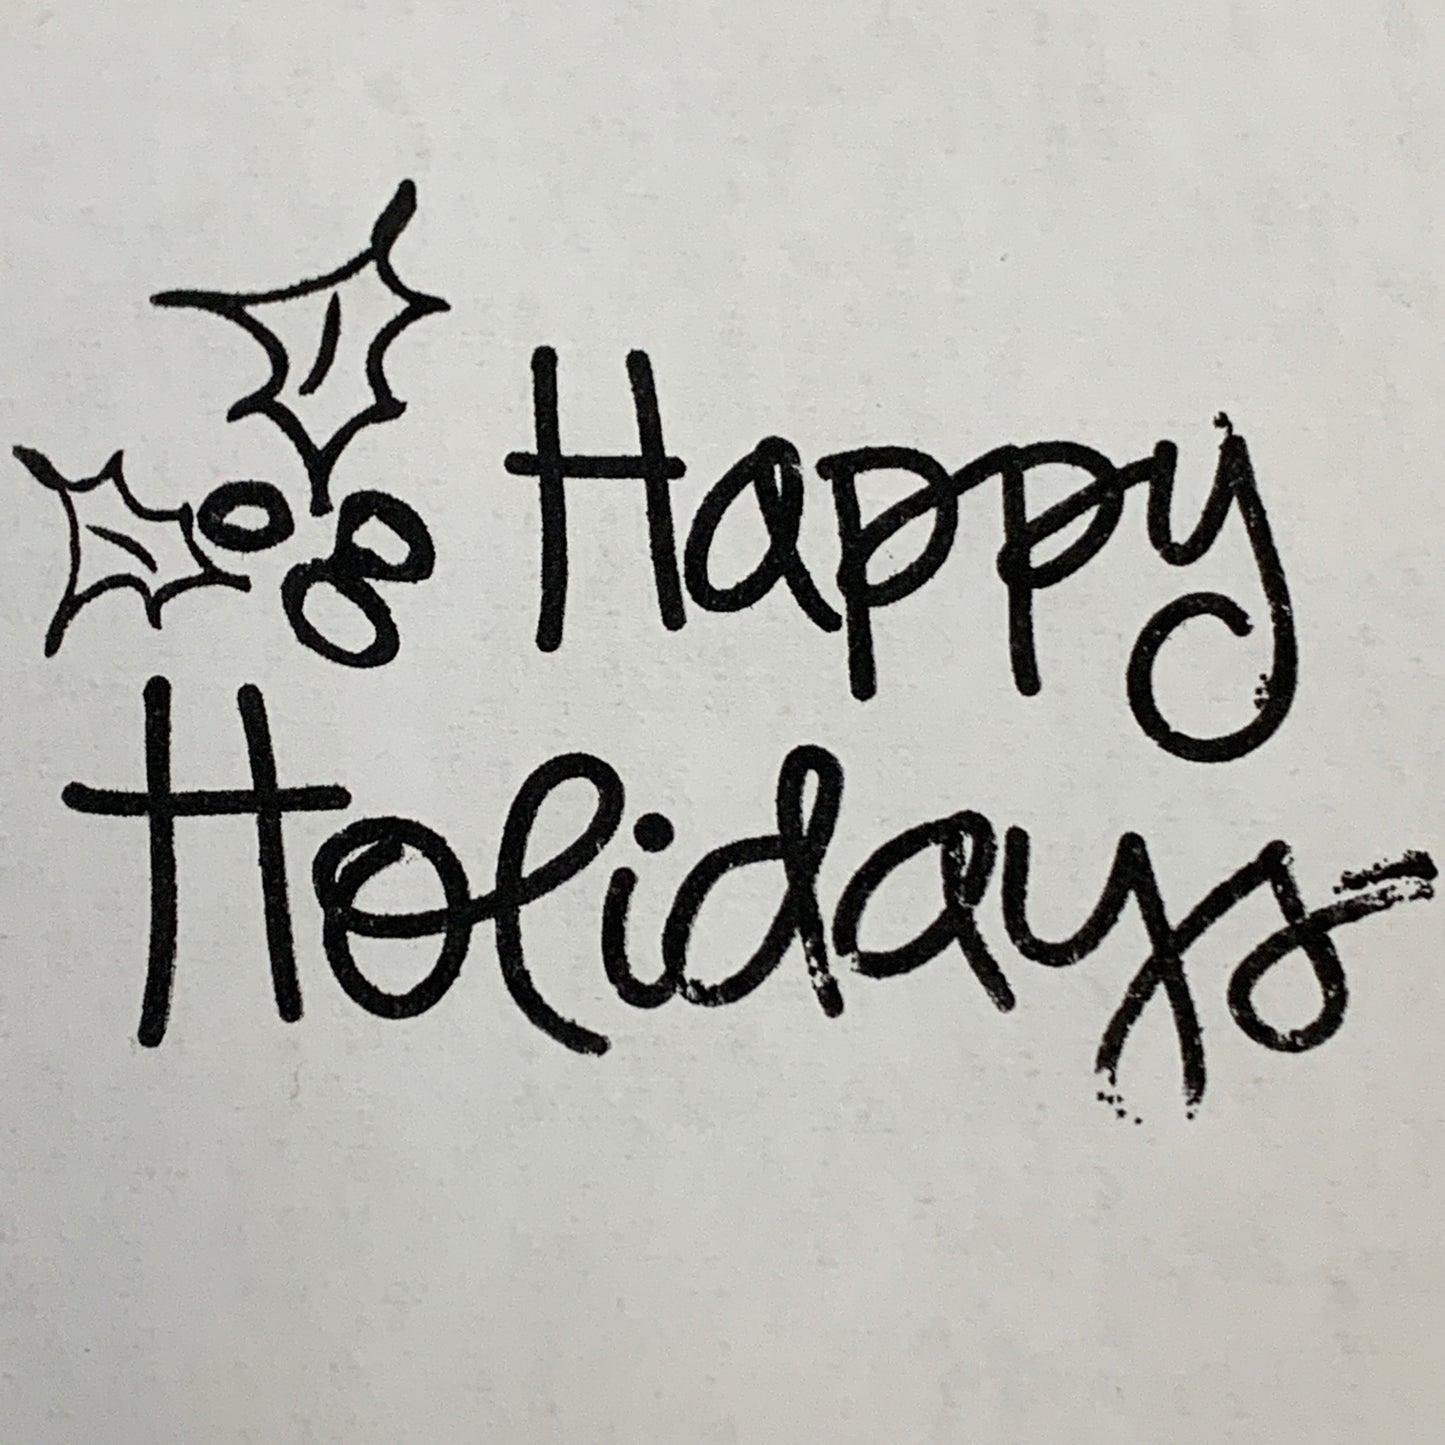 Happy Holidays Wood Mounted Rubber Stamp Alison Wong for Studio G